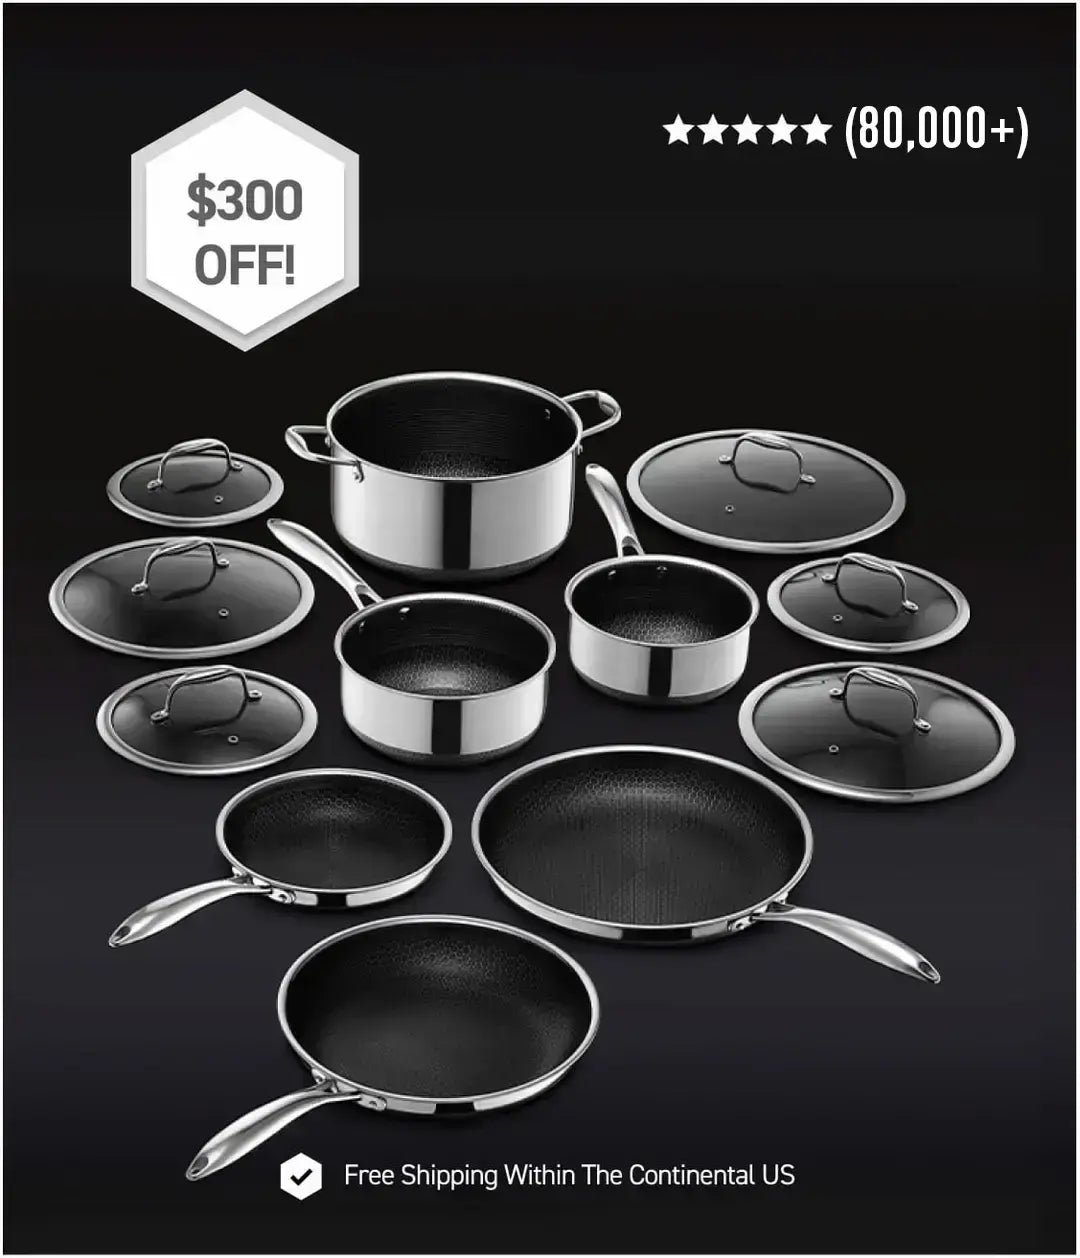 Collection of pots and pans with '$300 off' and 'Free Shipping' offer displayed.